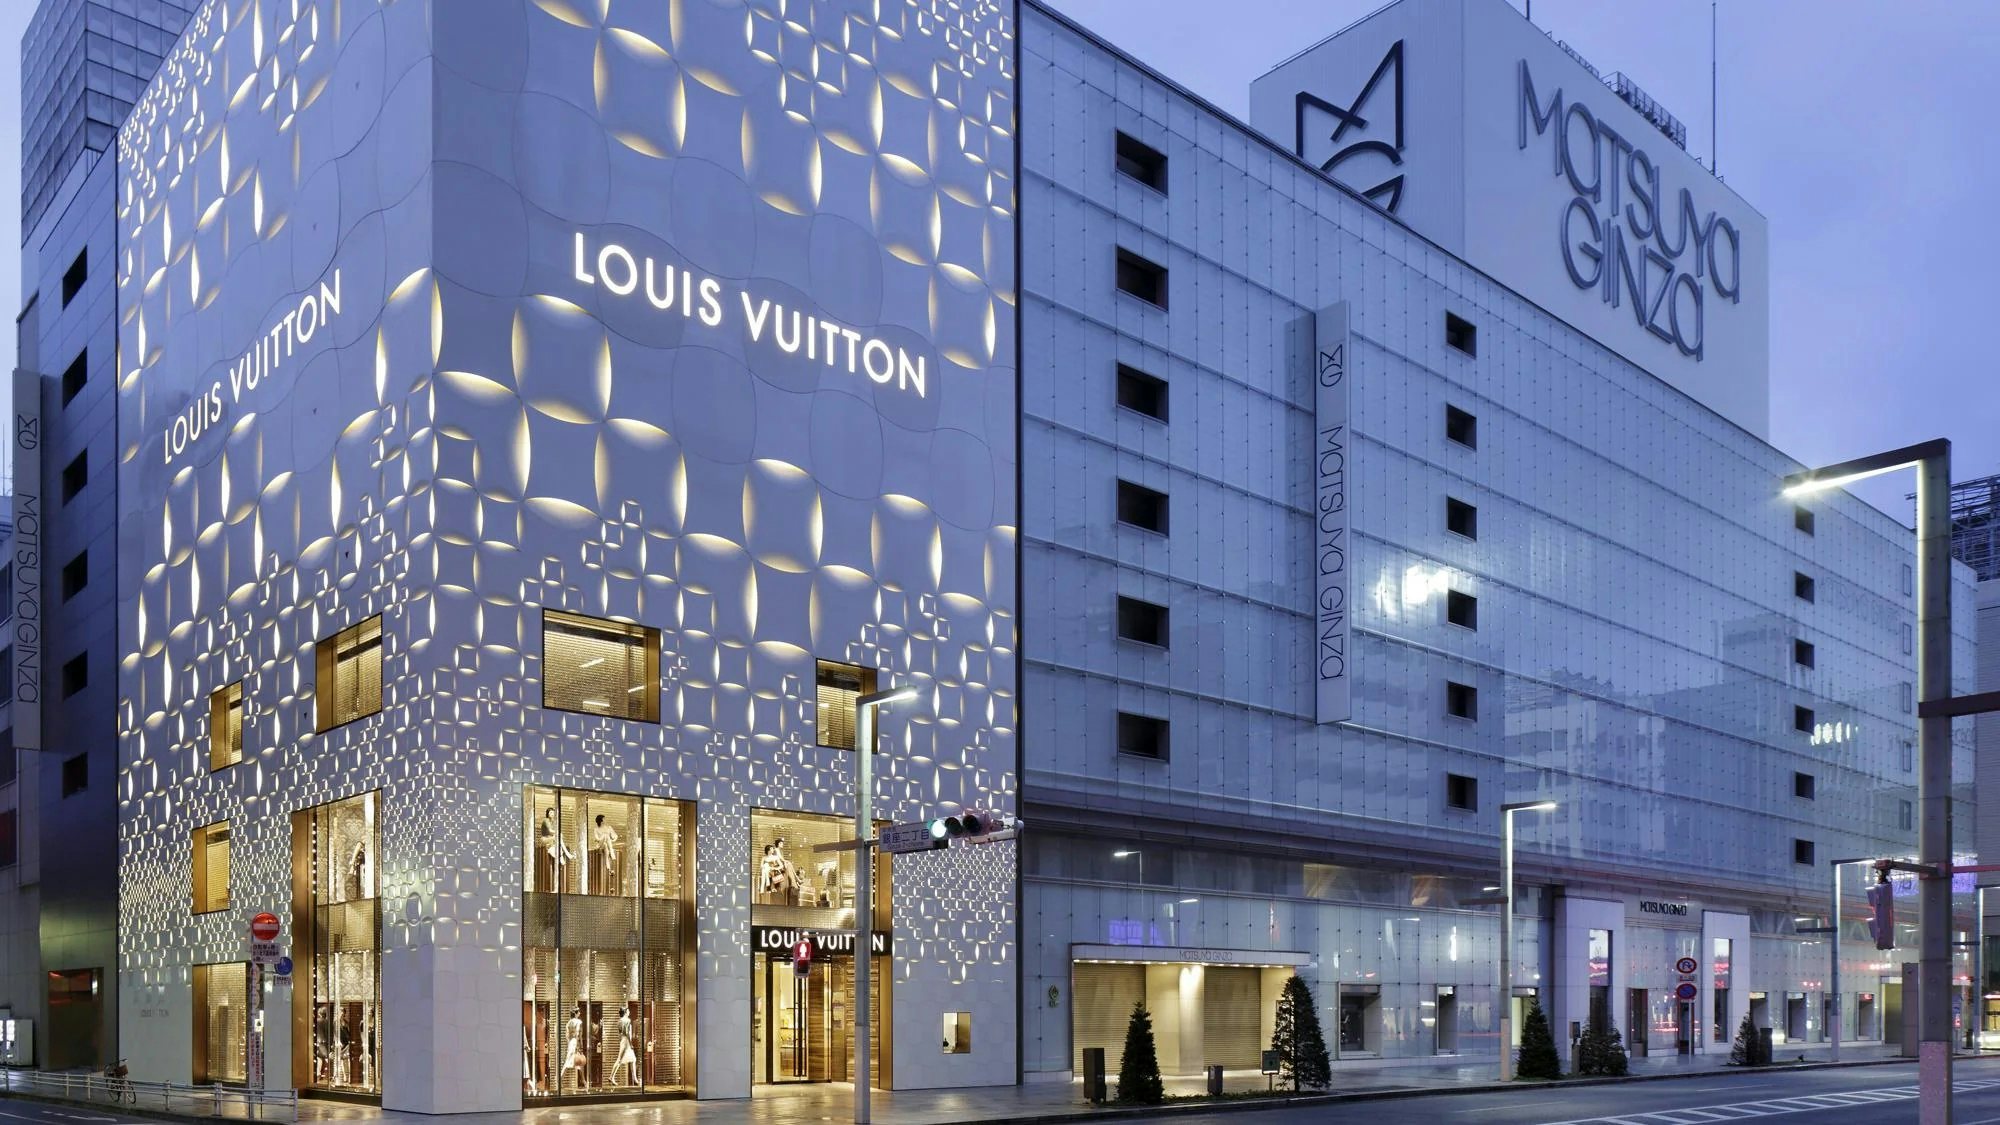 The Louis Vuitton store in Tokyo’s Ginza district. Photo: Louis Vuitton